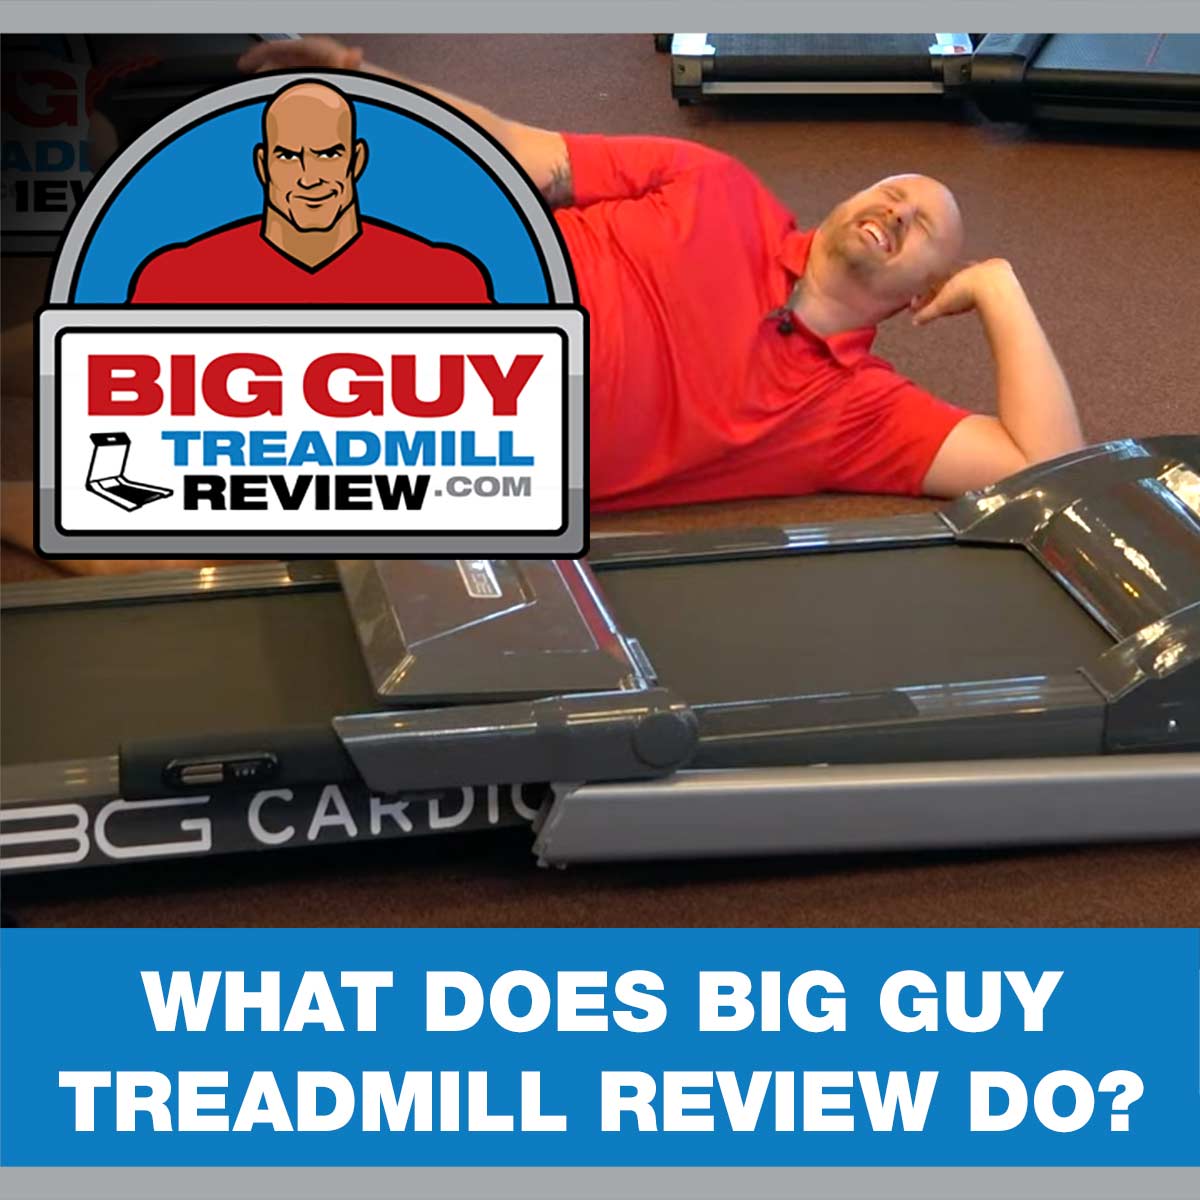 What does Big Guy Treadmill Review do?